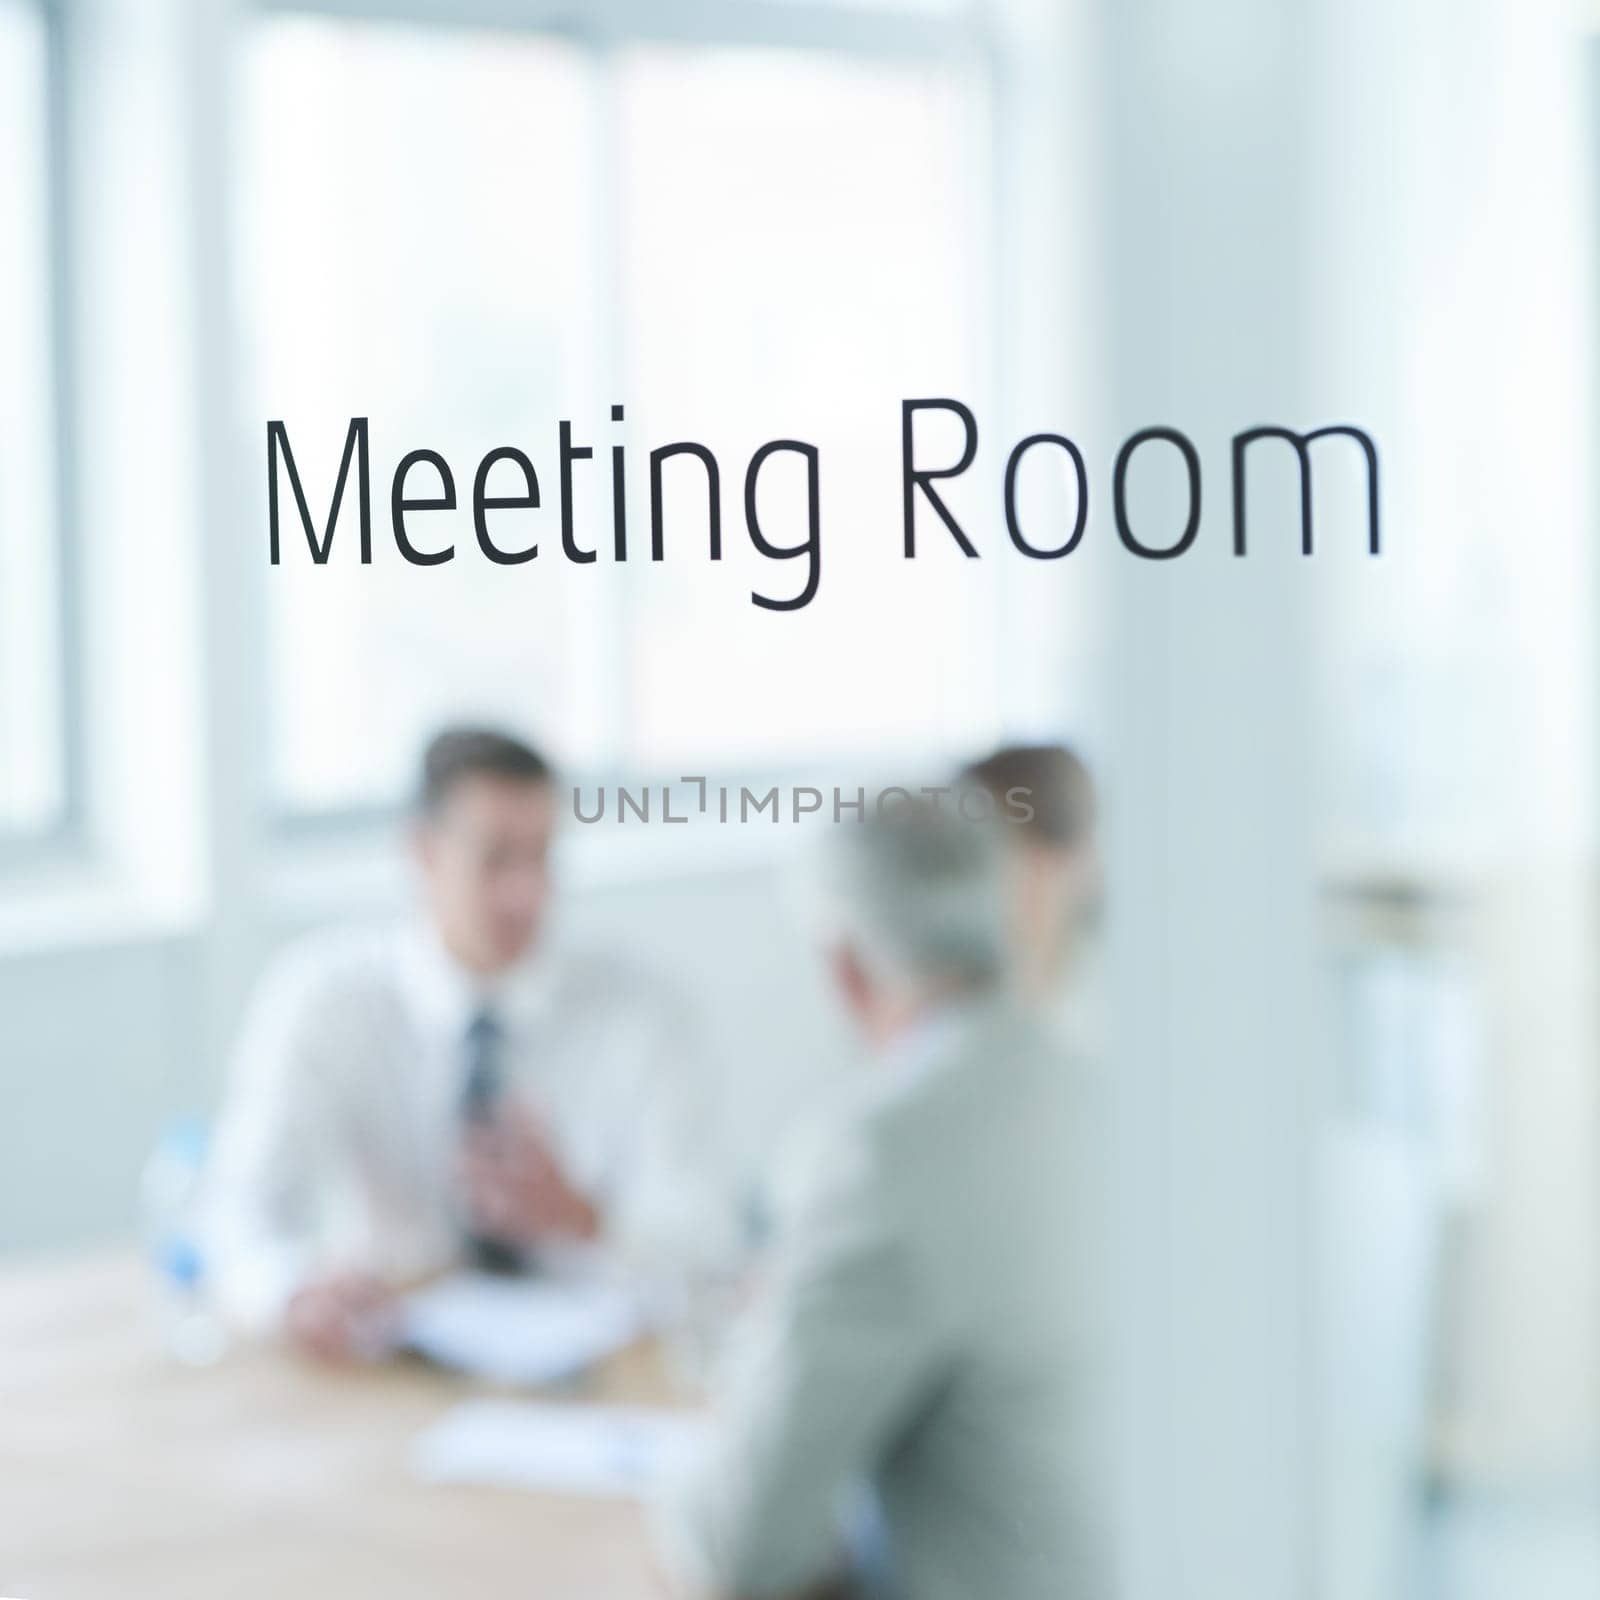 Behind closed doors. Closeup of a glass door reading meeting room with business people blurred in the room behind